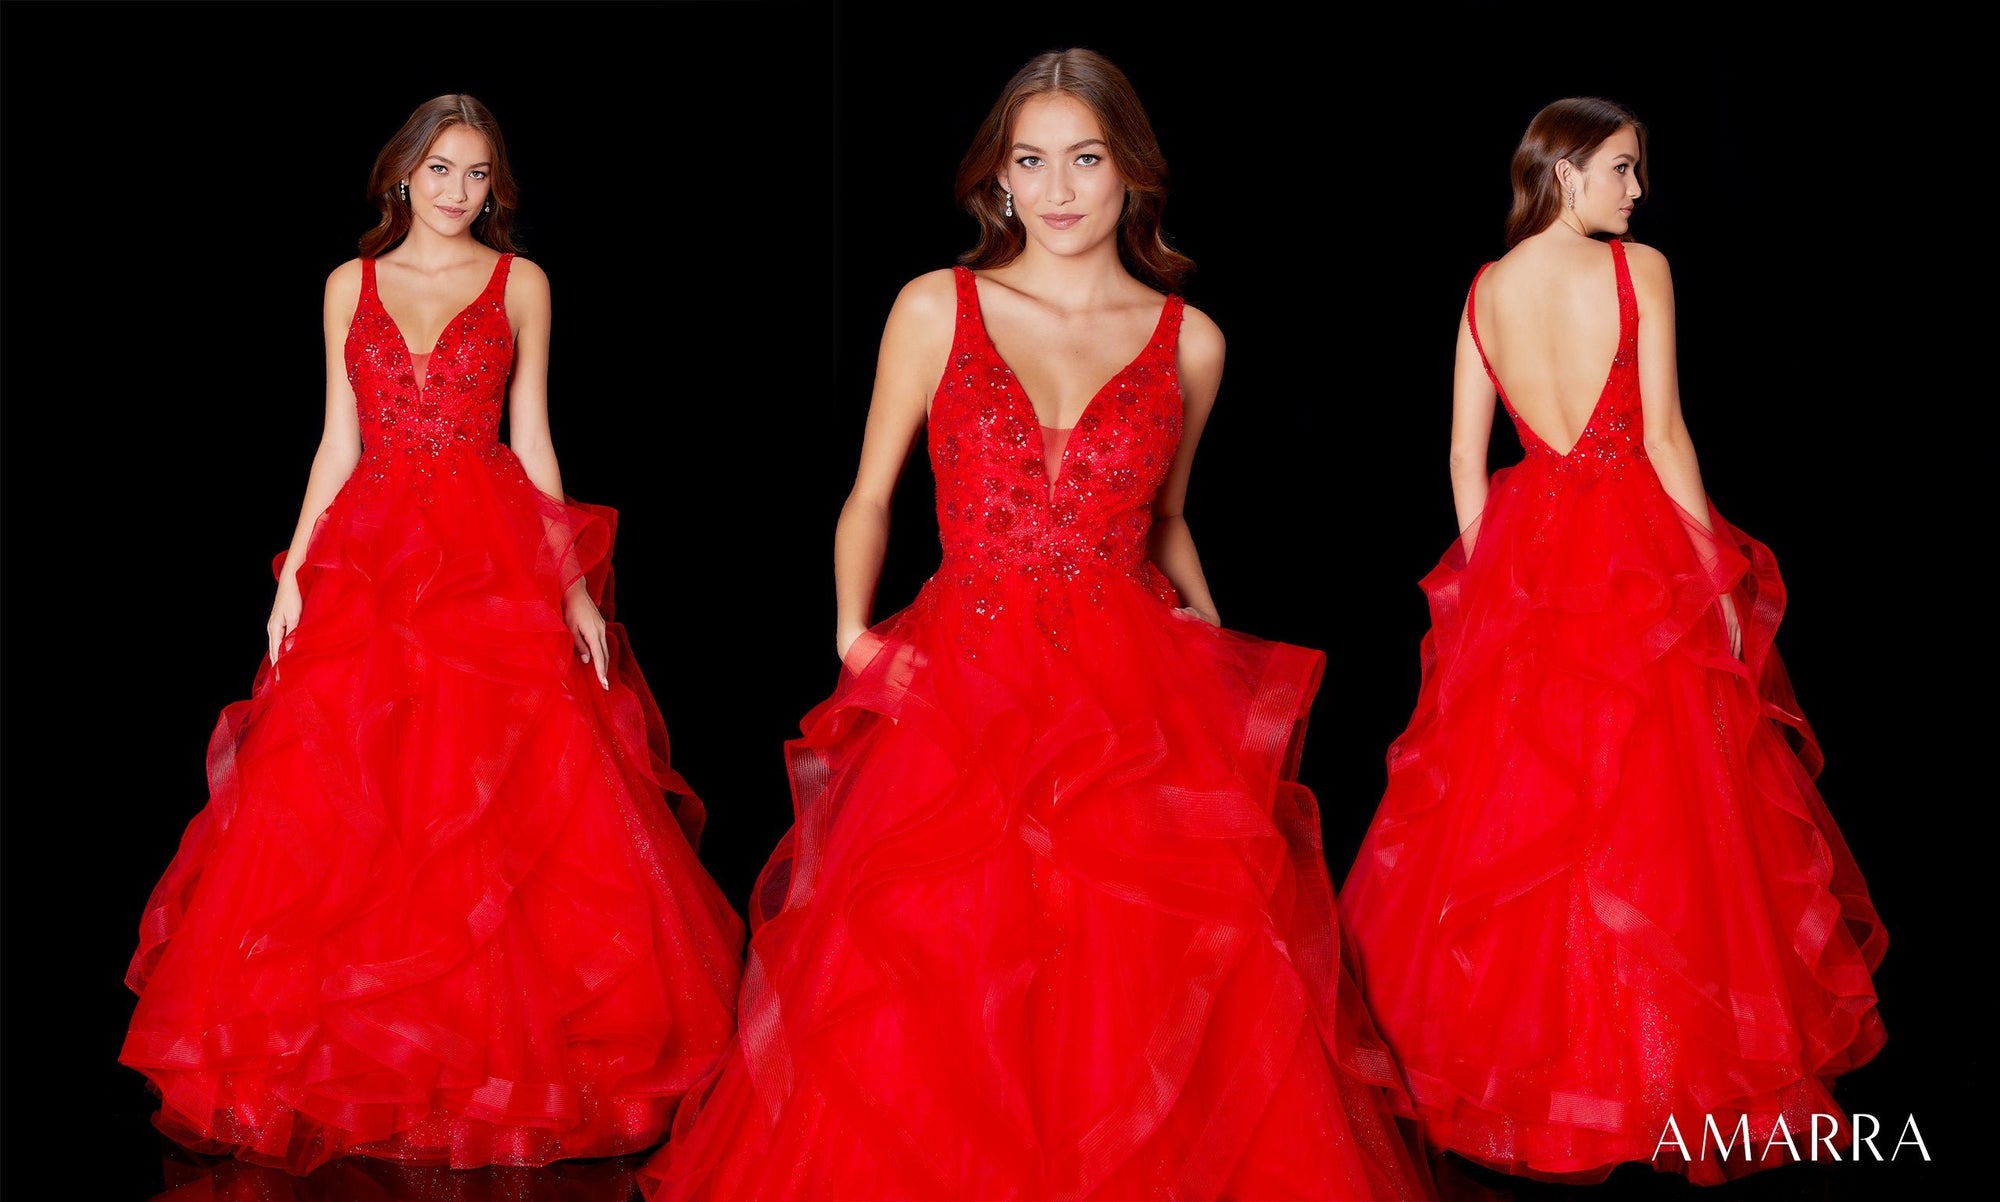 Rocking Ruffles: The Classic Trend in Prom Fashion